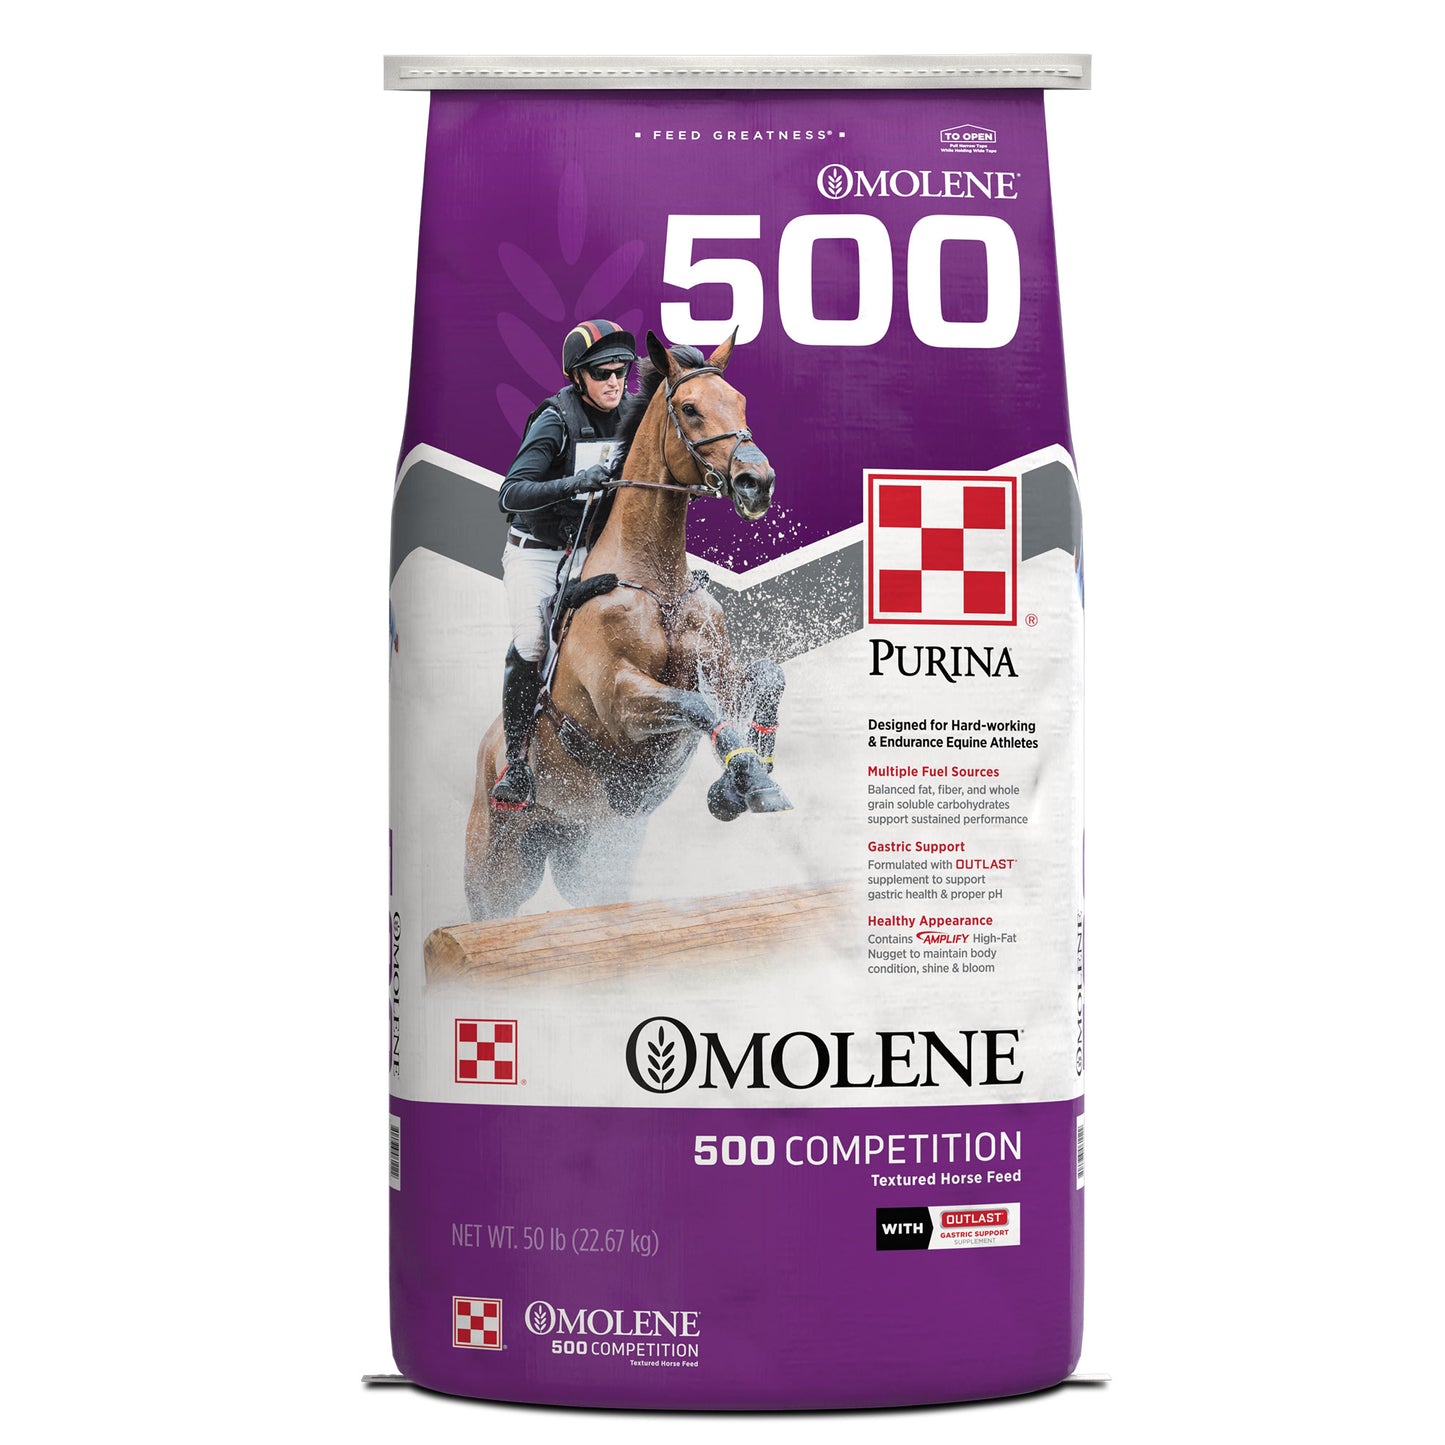 Front of Purina Omolene 500 Competition 50 Pound Bag